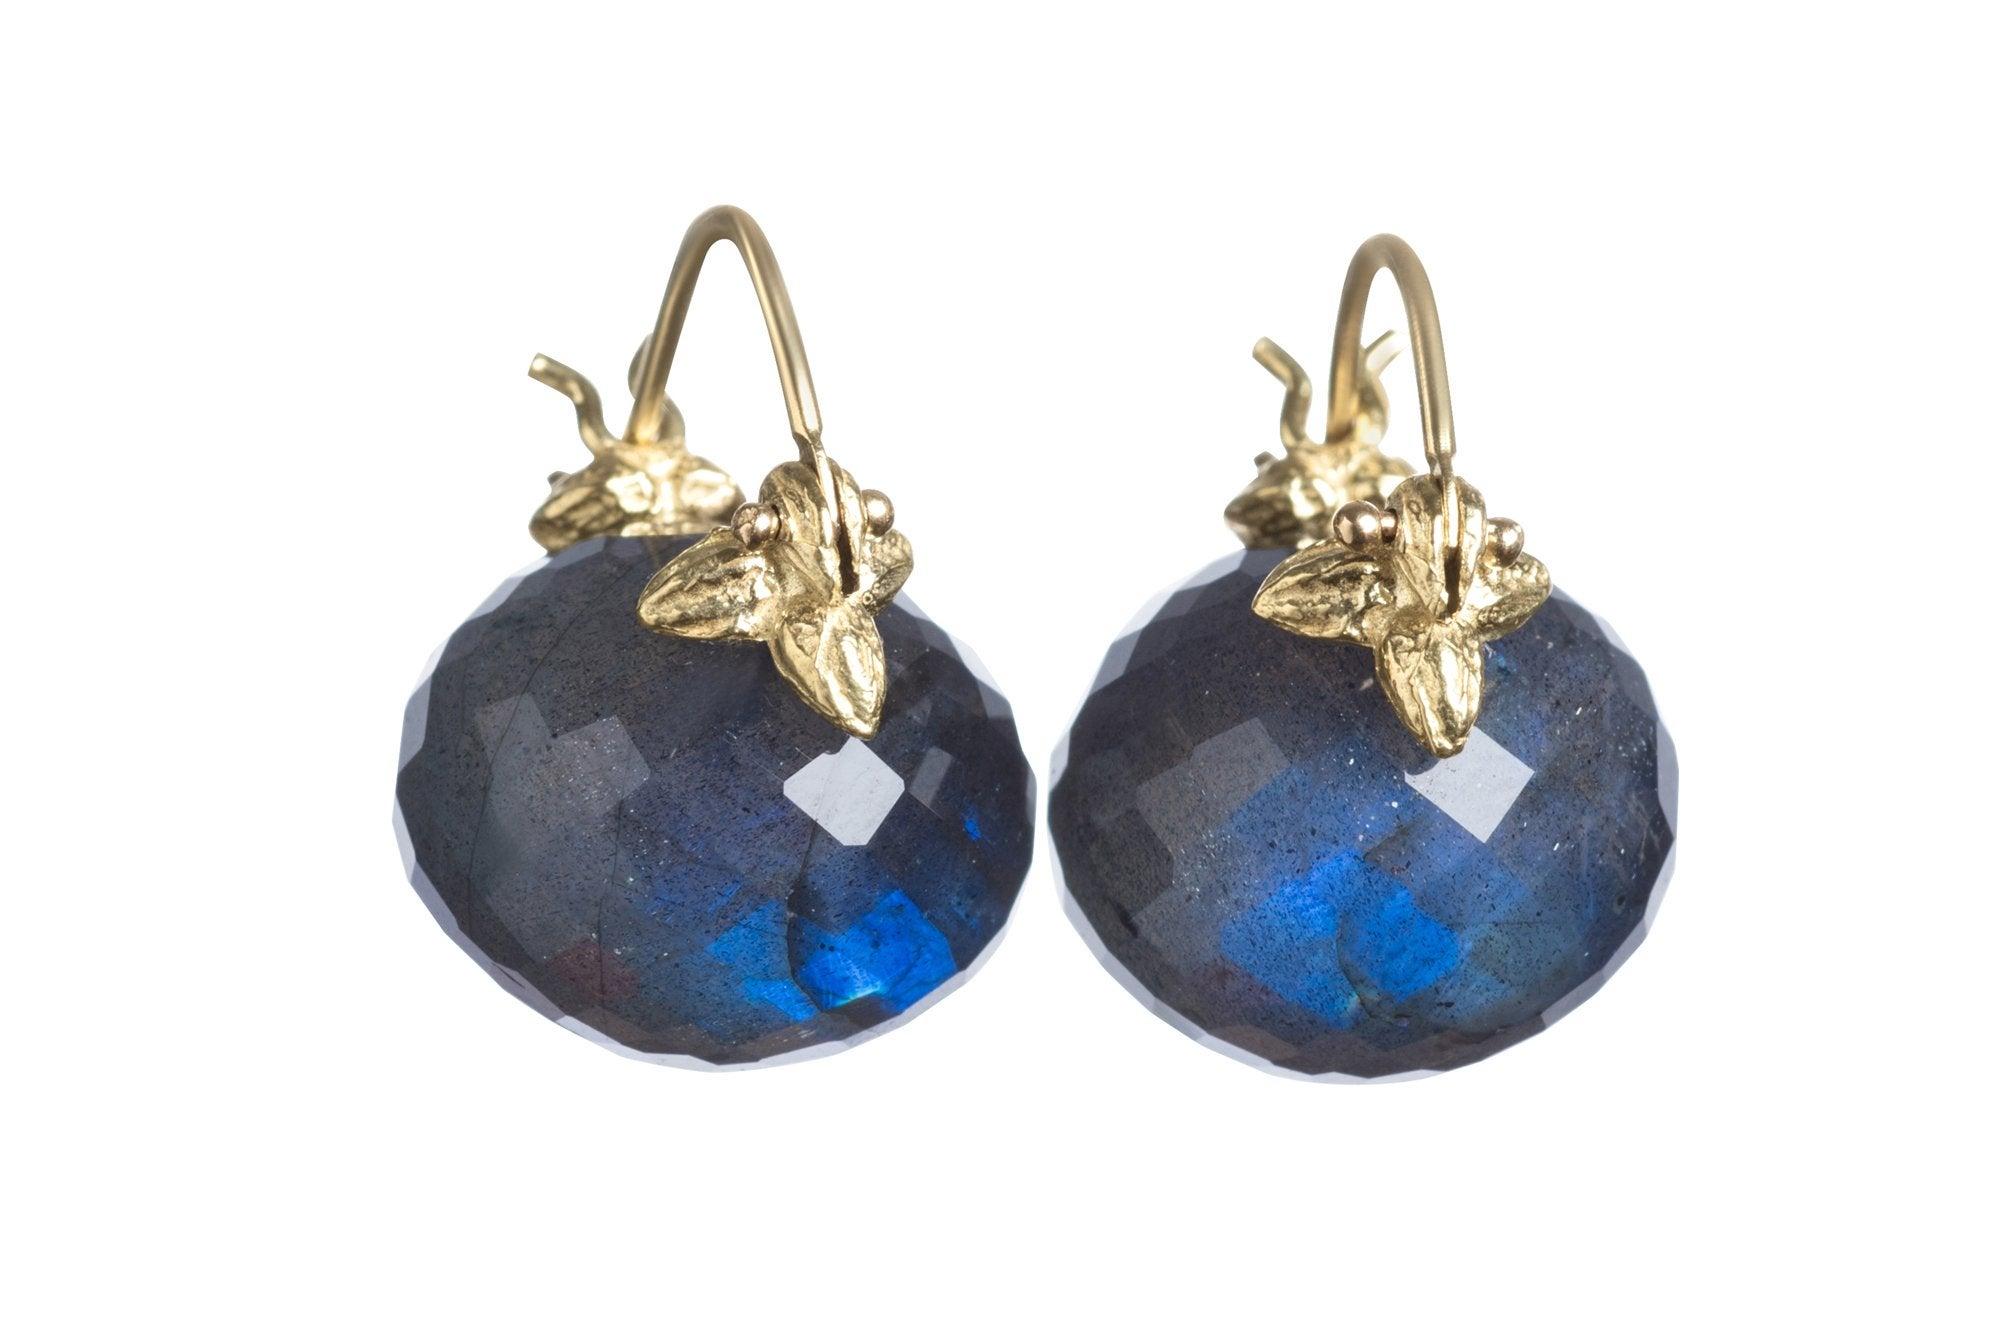 The finest blue flash emanates from these fabulously plump faceted labradorite rondelles. When refracted light isn't turning the gems into blue fire, labradorite is a sophisticated shade of deep taupe-gray. The combination of reserve and dazzle is